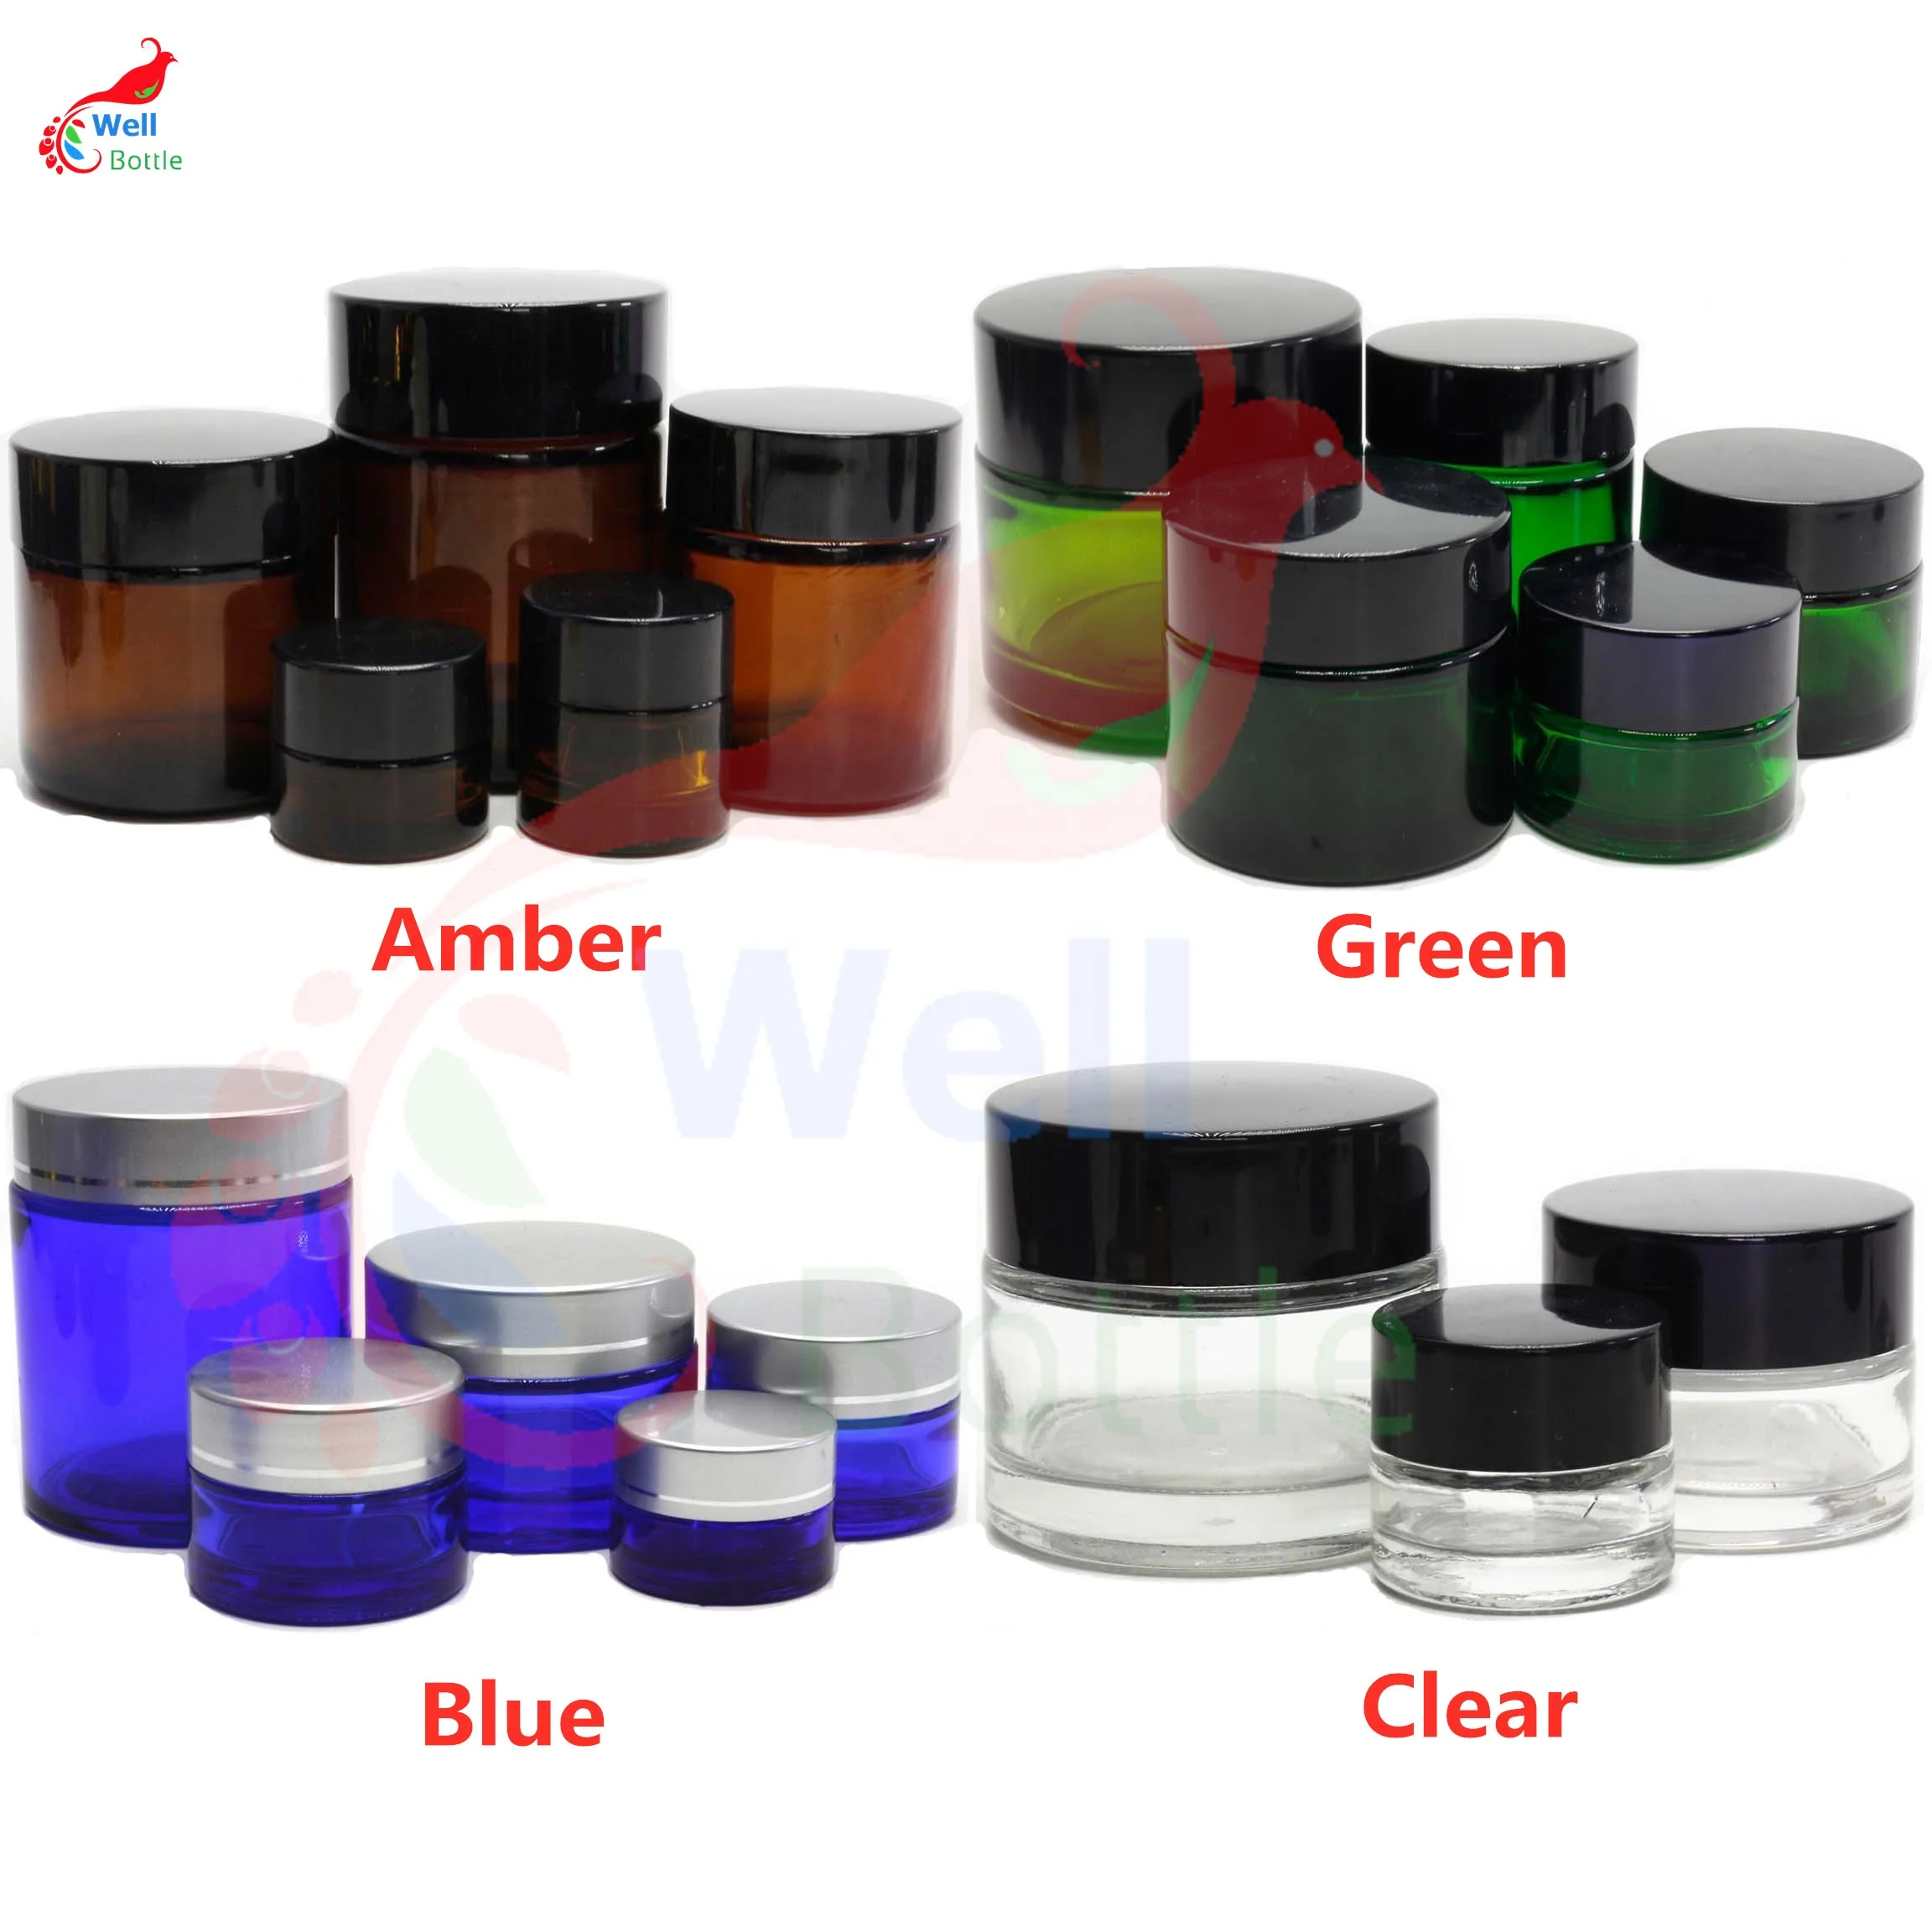 Download In Stock Empty Amber Blue Green Clear Glass Cosmetic Jars 30g Glass Cream Jars For Cosmetic Packaging Gj 888a Buy Glass Cosmetic Jar Cosmetic Jar 30g Cosmetic Jar Glass Product On Alibaba Com